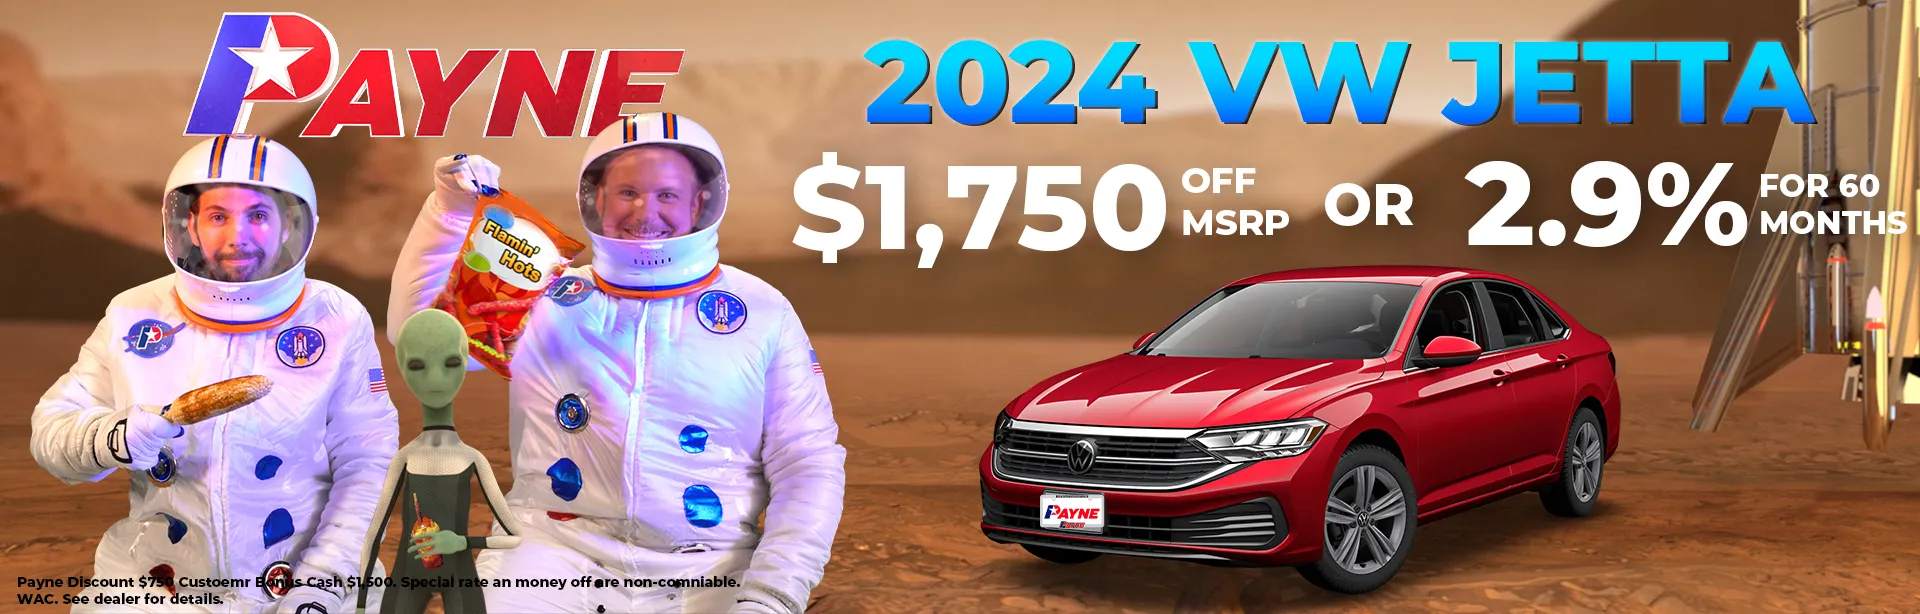 Get $1,750 off MSRP or 2.9% for 60 Months on a 2024 VW Jetta